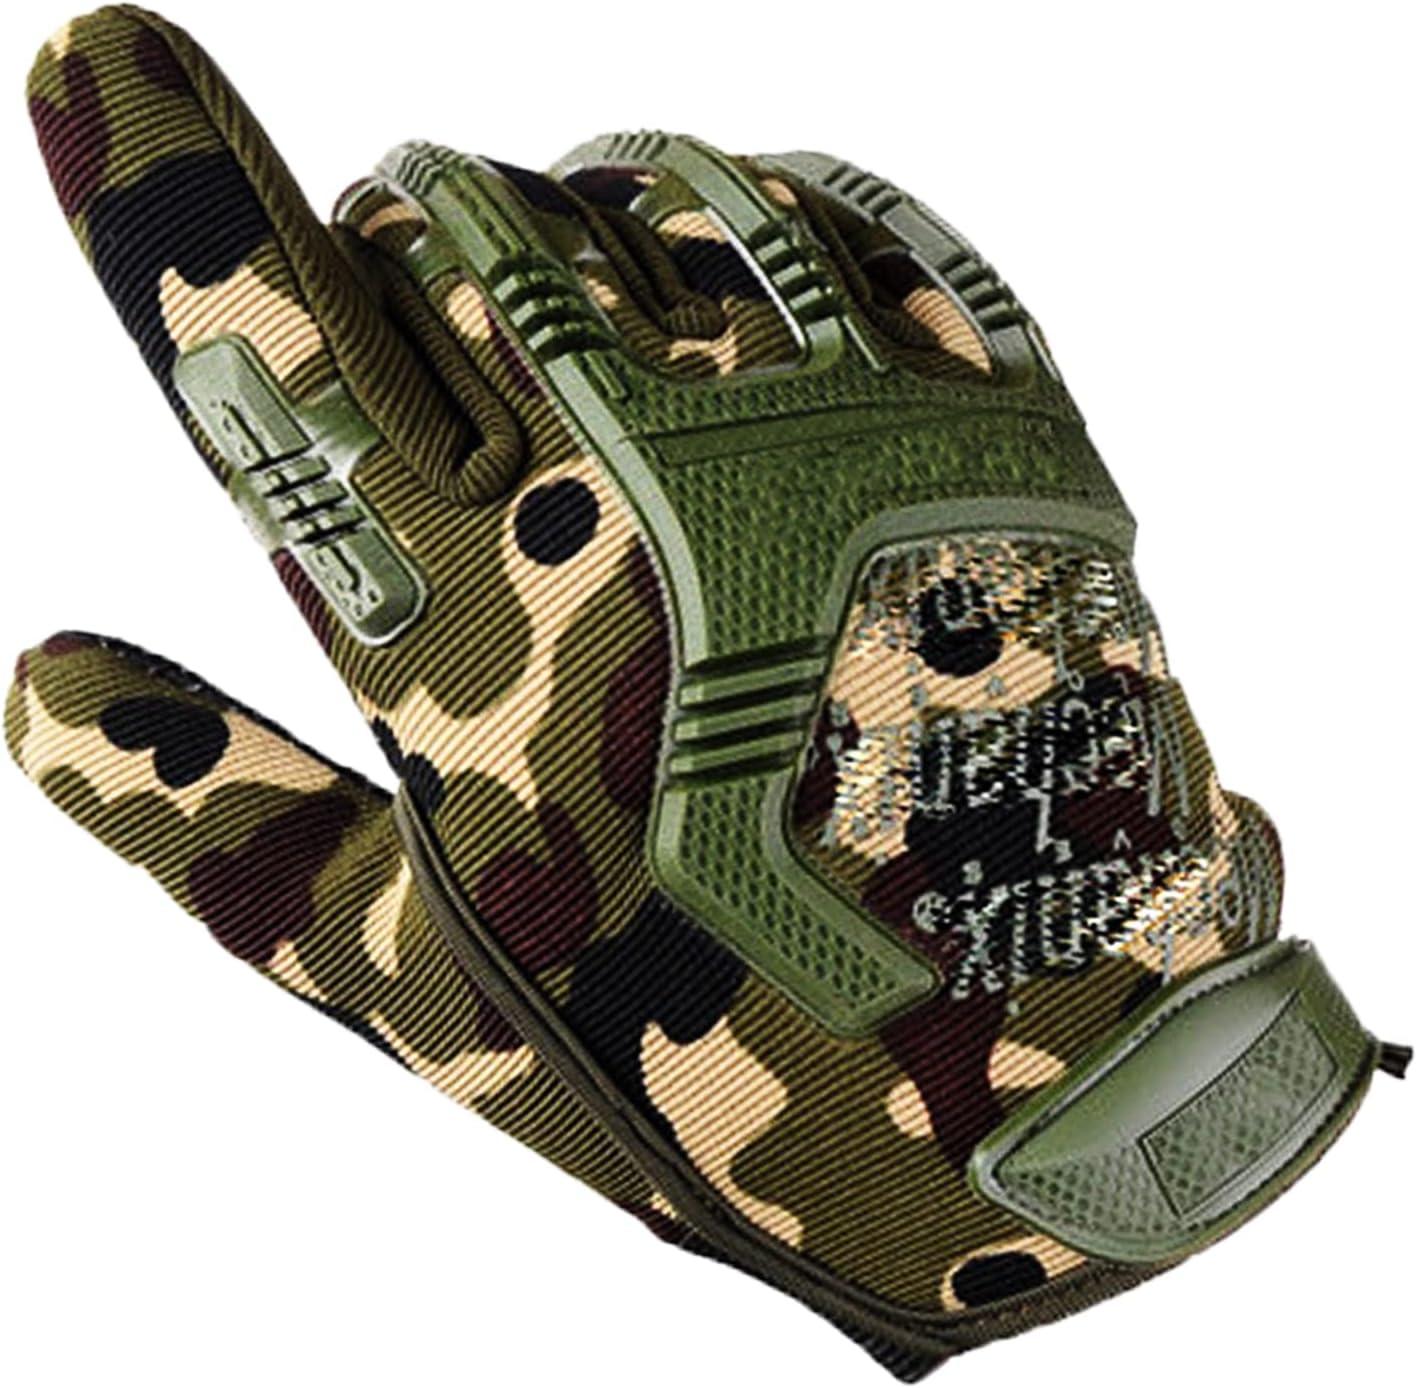 Camo Hunting Gloves,Waterproof Warm Glove,Lightweight Pro Anti-Slip Shooting  Full Finger Mitten,Deer & Turkey Hunting Accessories and  Clothing,Camouflage Gear Archery Accessories Camouflage hunting gloves Large